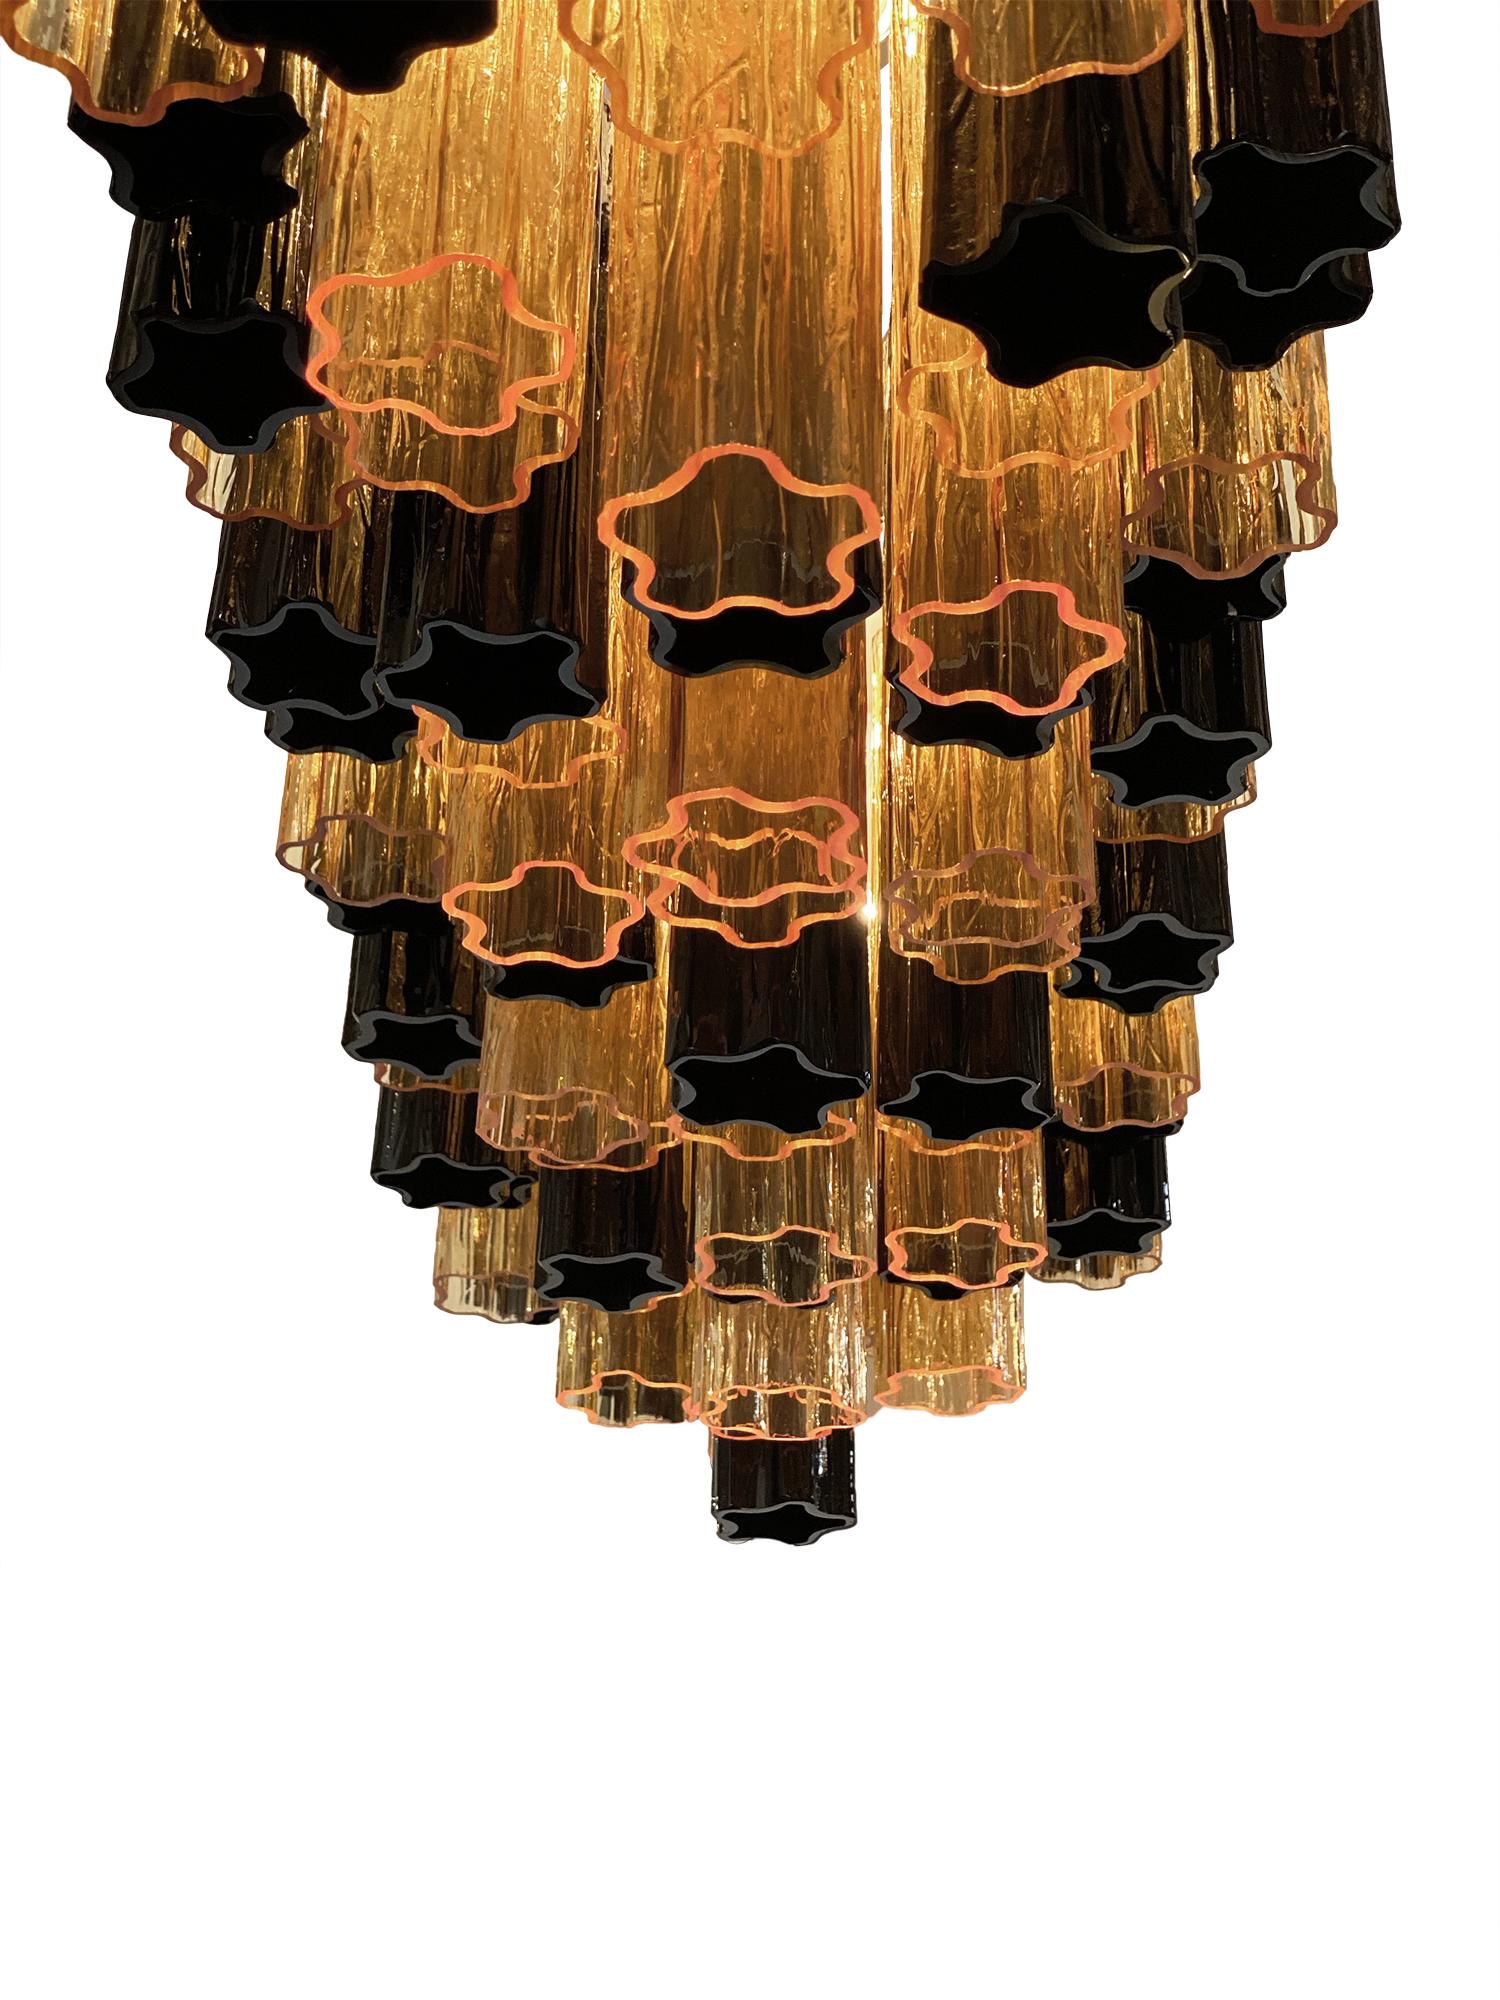 Murano glass tronchi chandelier by Alberto Dona. This piece, from Italy, combines a hand blown tronchi glass components in both black and amber tones. It has been newly wired to fit US standards and requires ten candelabra base bulbs. The current